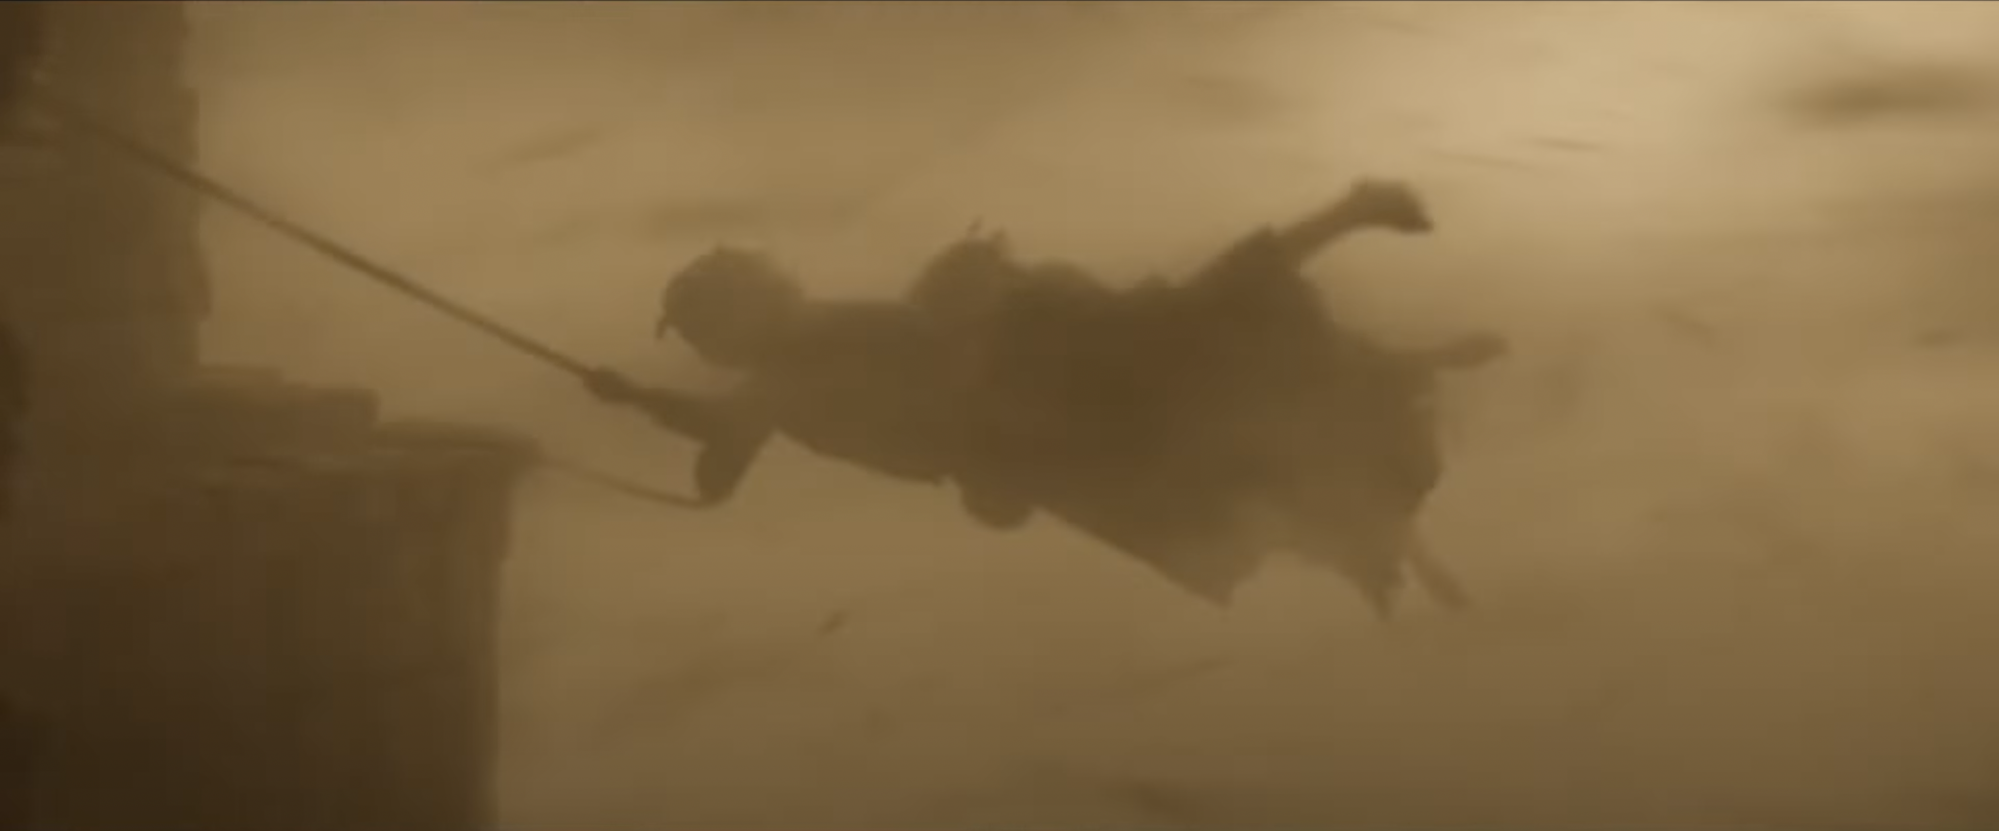 Markella Kavenagh as Nori Brandyfoot in "The Lord of the Rings: The Rings of Power," holding onto a rope during a massive sandstorm.